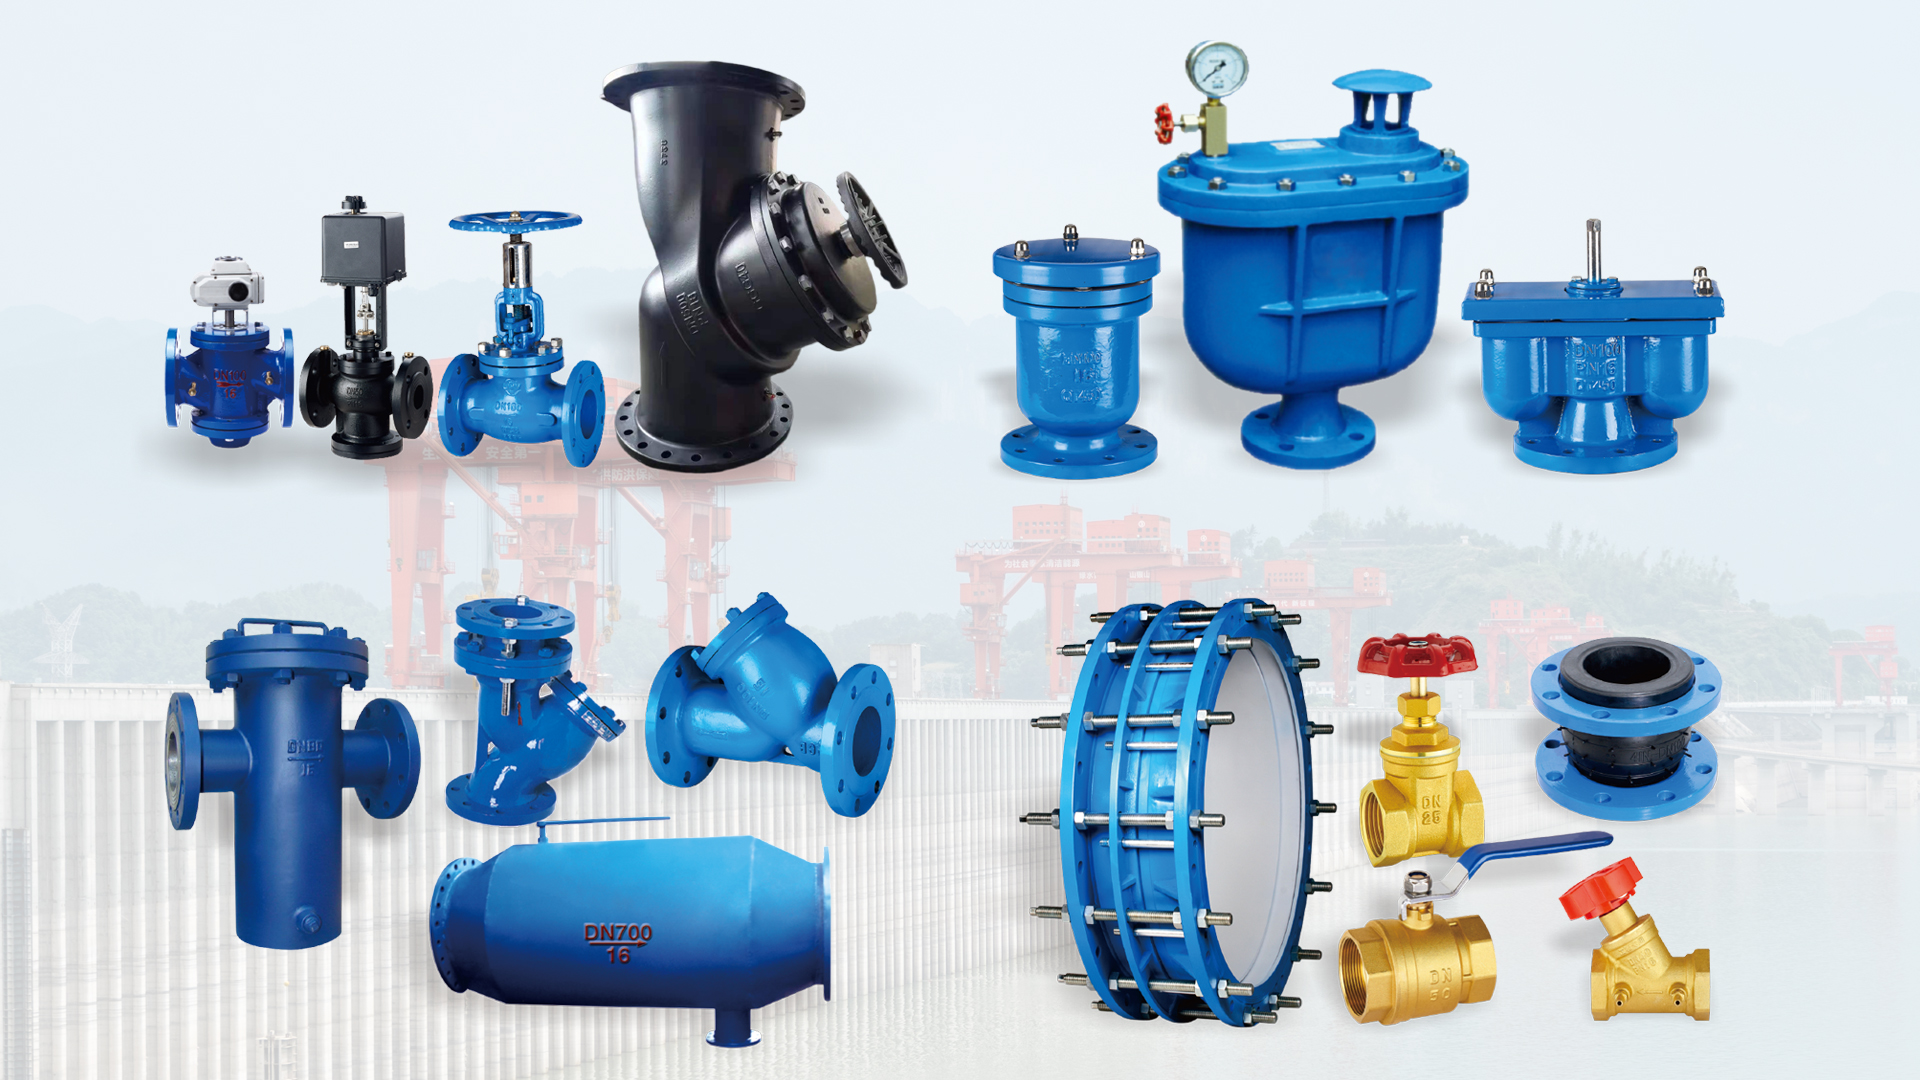 Analysis of advantages and disadvantages of Chinese butterfly valve, Chinese ball valve, Chinese gate valve, Chinese globe valve, Chinese check valve: A comprehensive evaluation of the performance of various valves